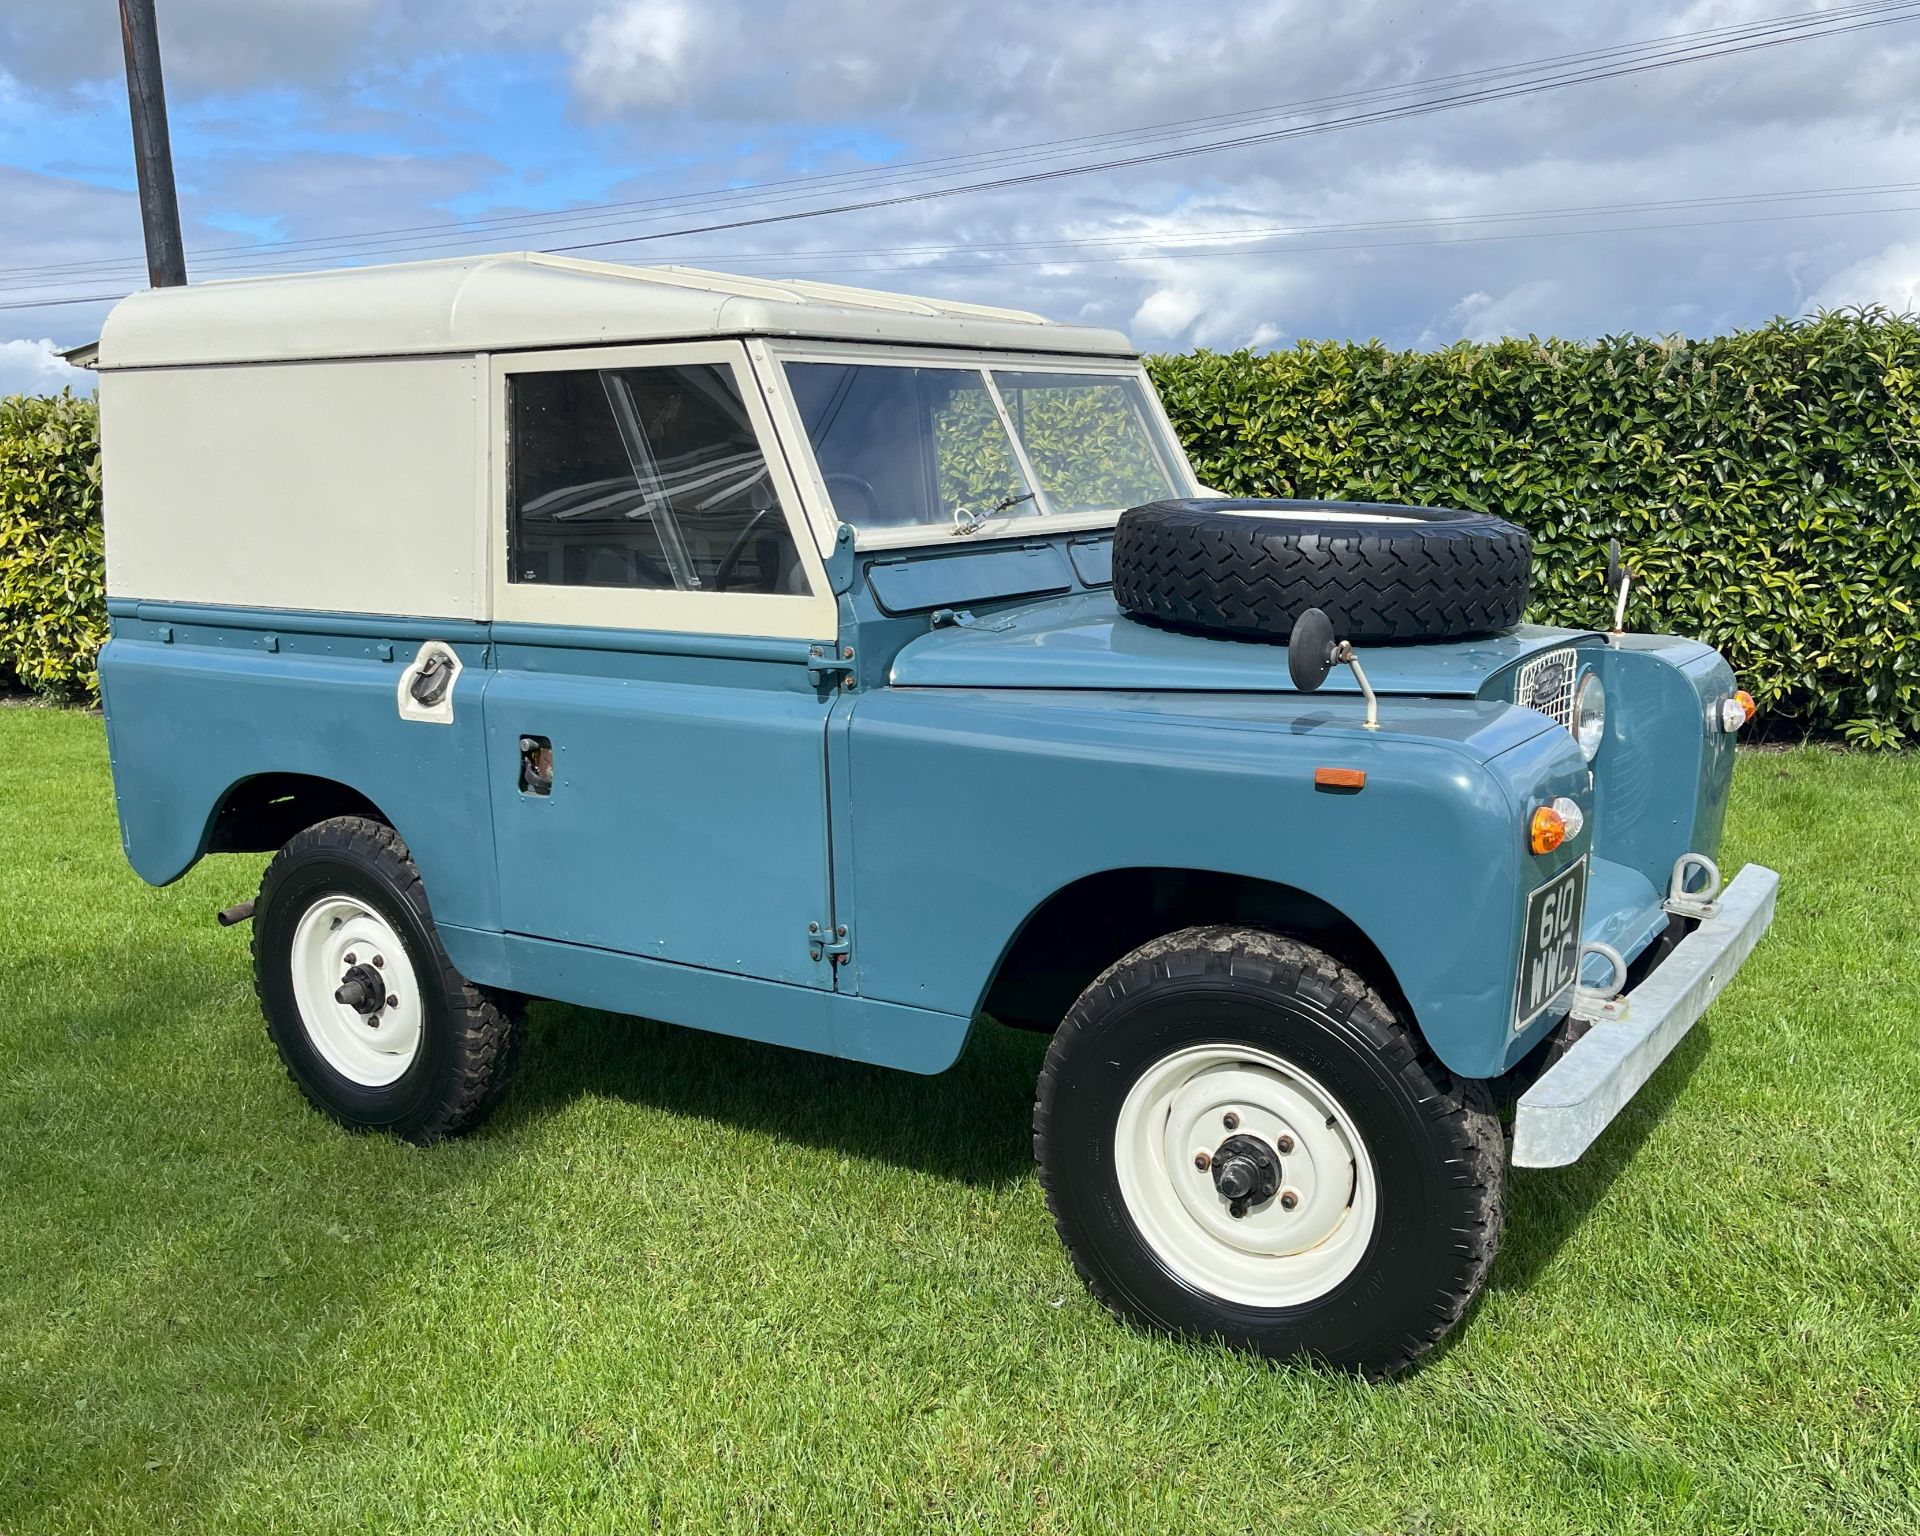 1962 Land Rover 88 Series II, petrol 2.25 litre engine, blue with 64,078 showing on the milometer, - Image 6 of 14